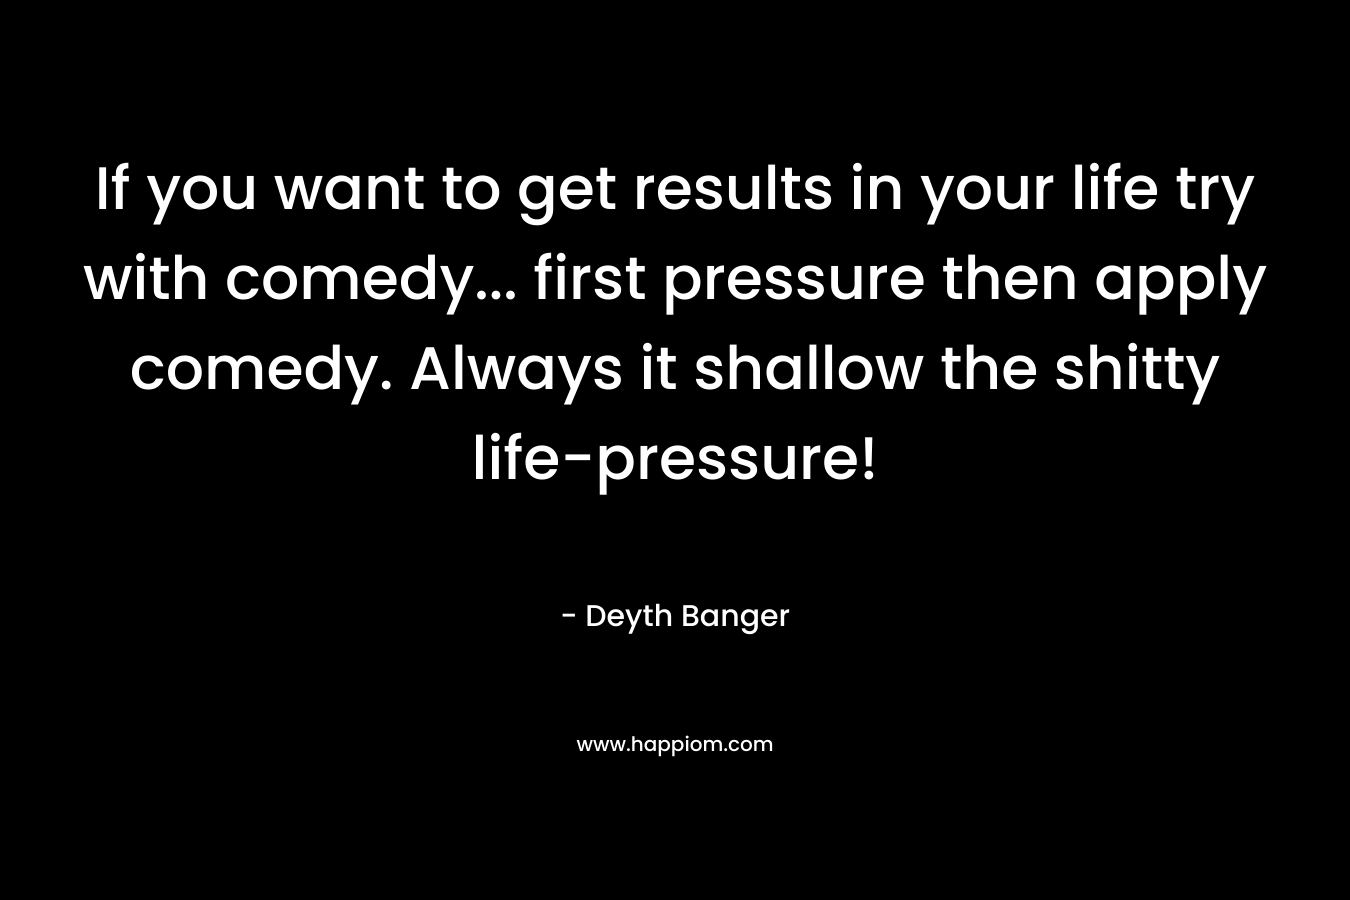 If you want to get results in your life try with comedy… first pressure then apply comedy. Always it shallow the shitty life-pressure! – Deyth Banger